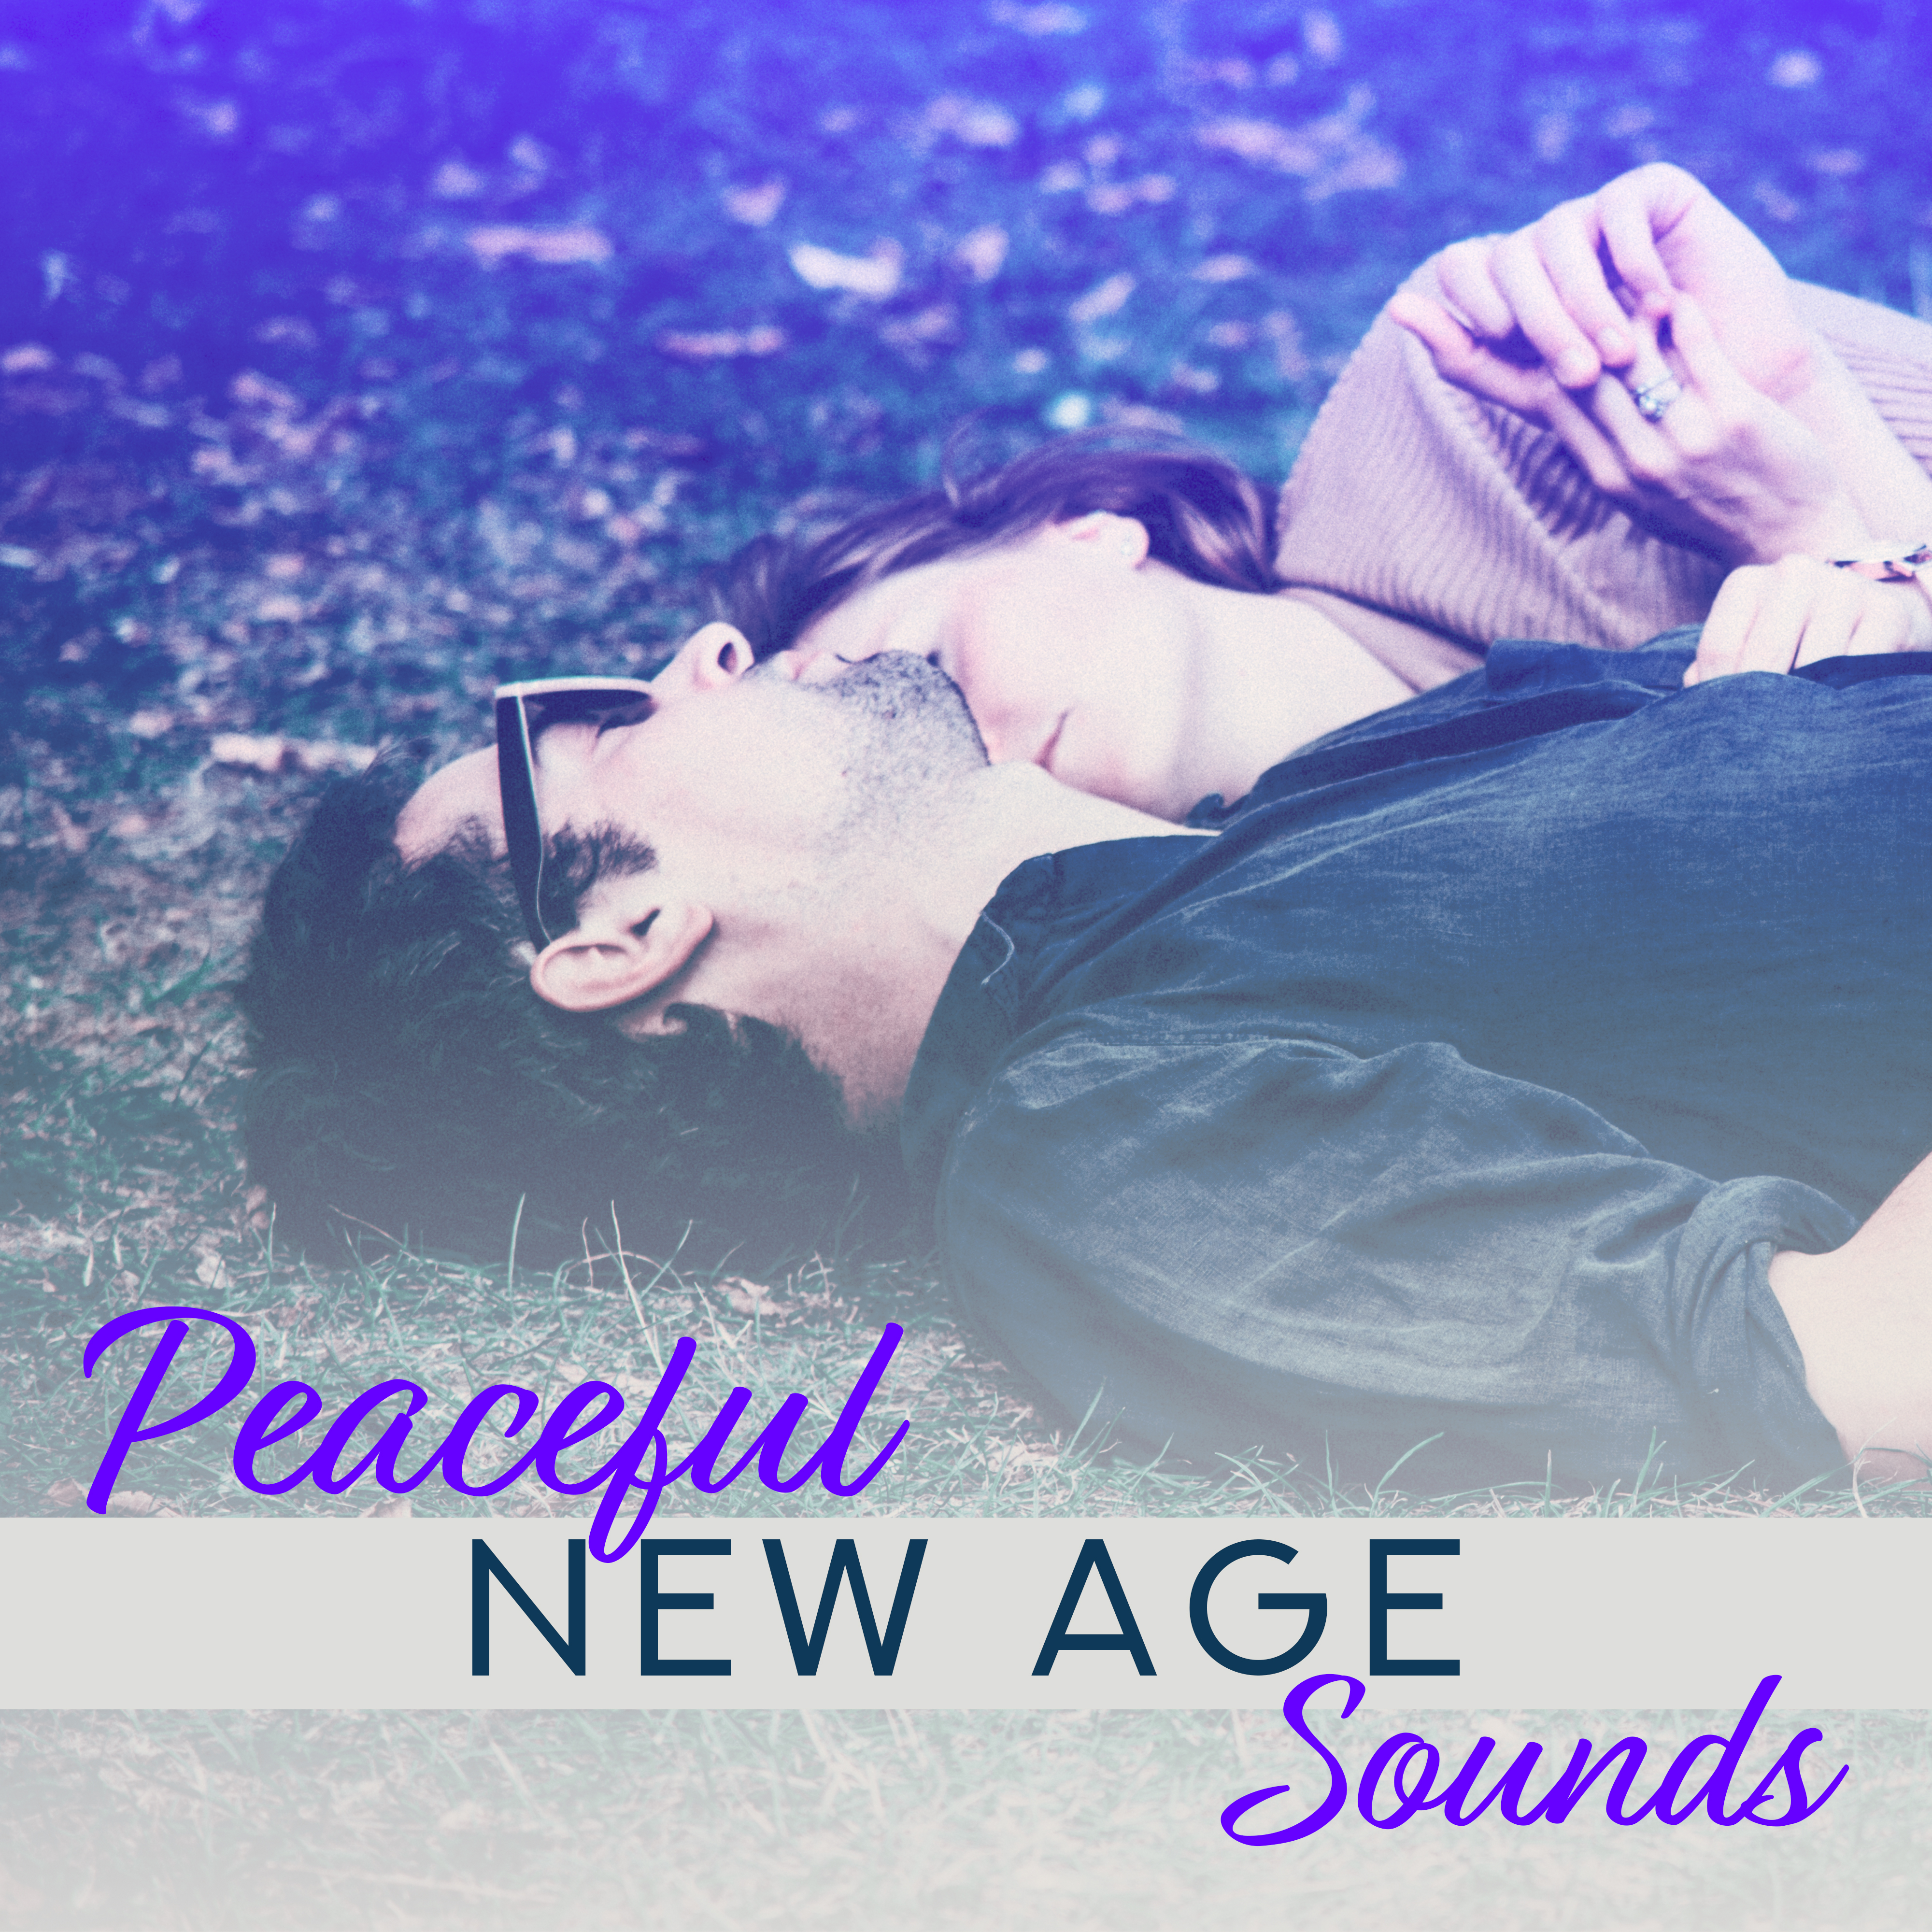 Peaceful New Age Sounds  Relax with New Age Songs, Music to Relieve Stress, Healing Therapy Sounds, Melodies to Calm Down